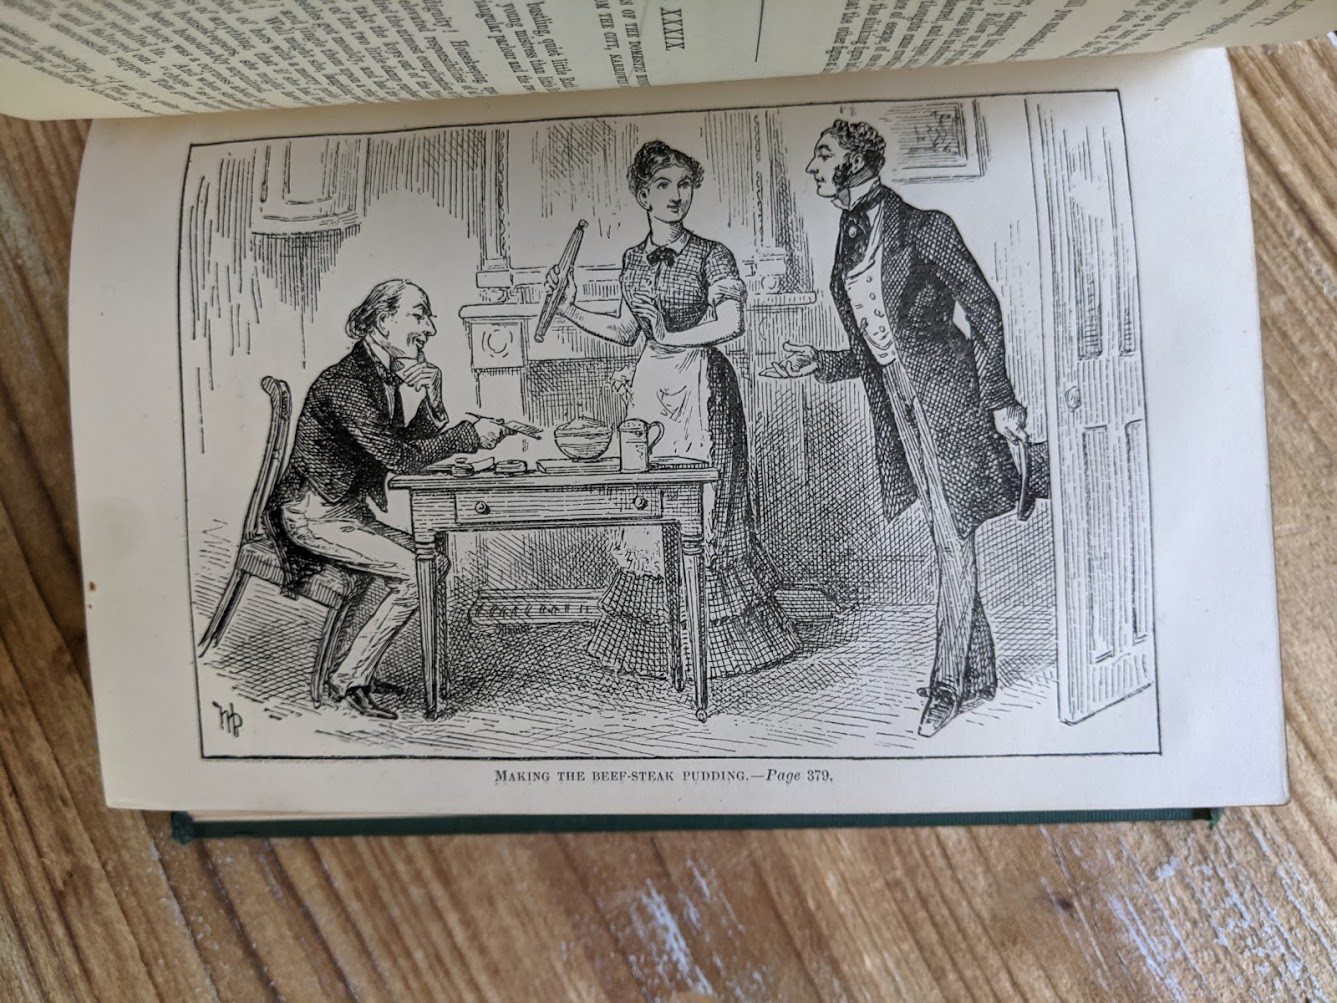 Making the Beef Steak Pudding -antiquarian copy of The Life and Adventures of Martin Chuzzlewit by Charles Dickens - Circa 1880's - undated